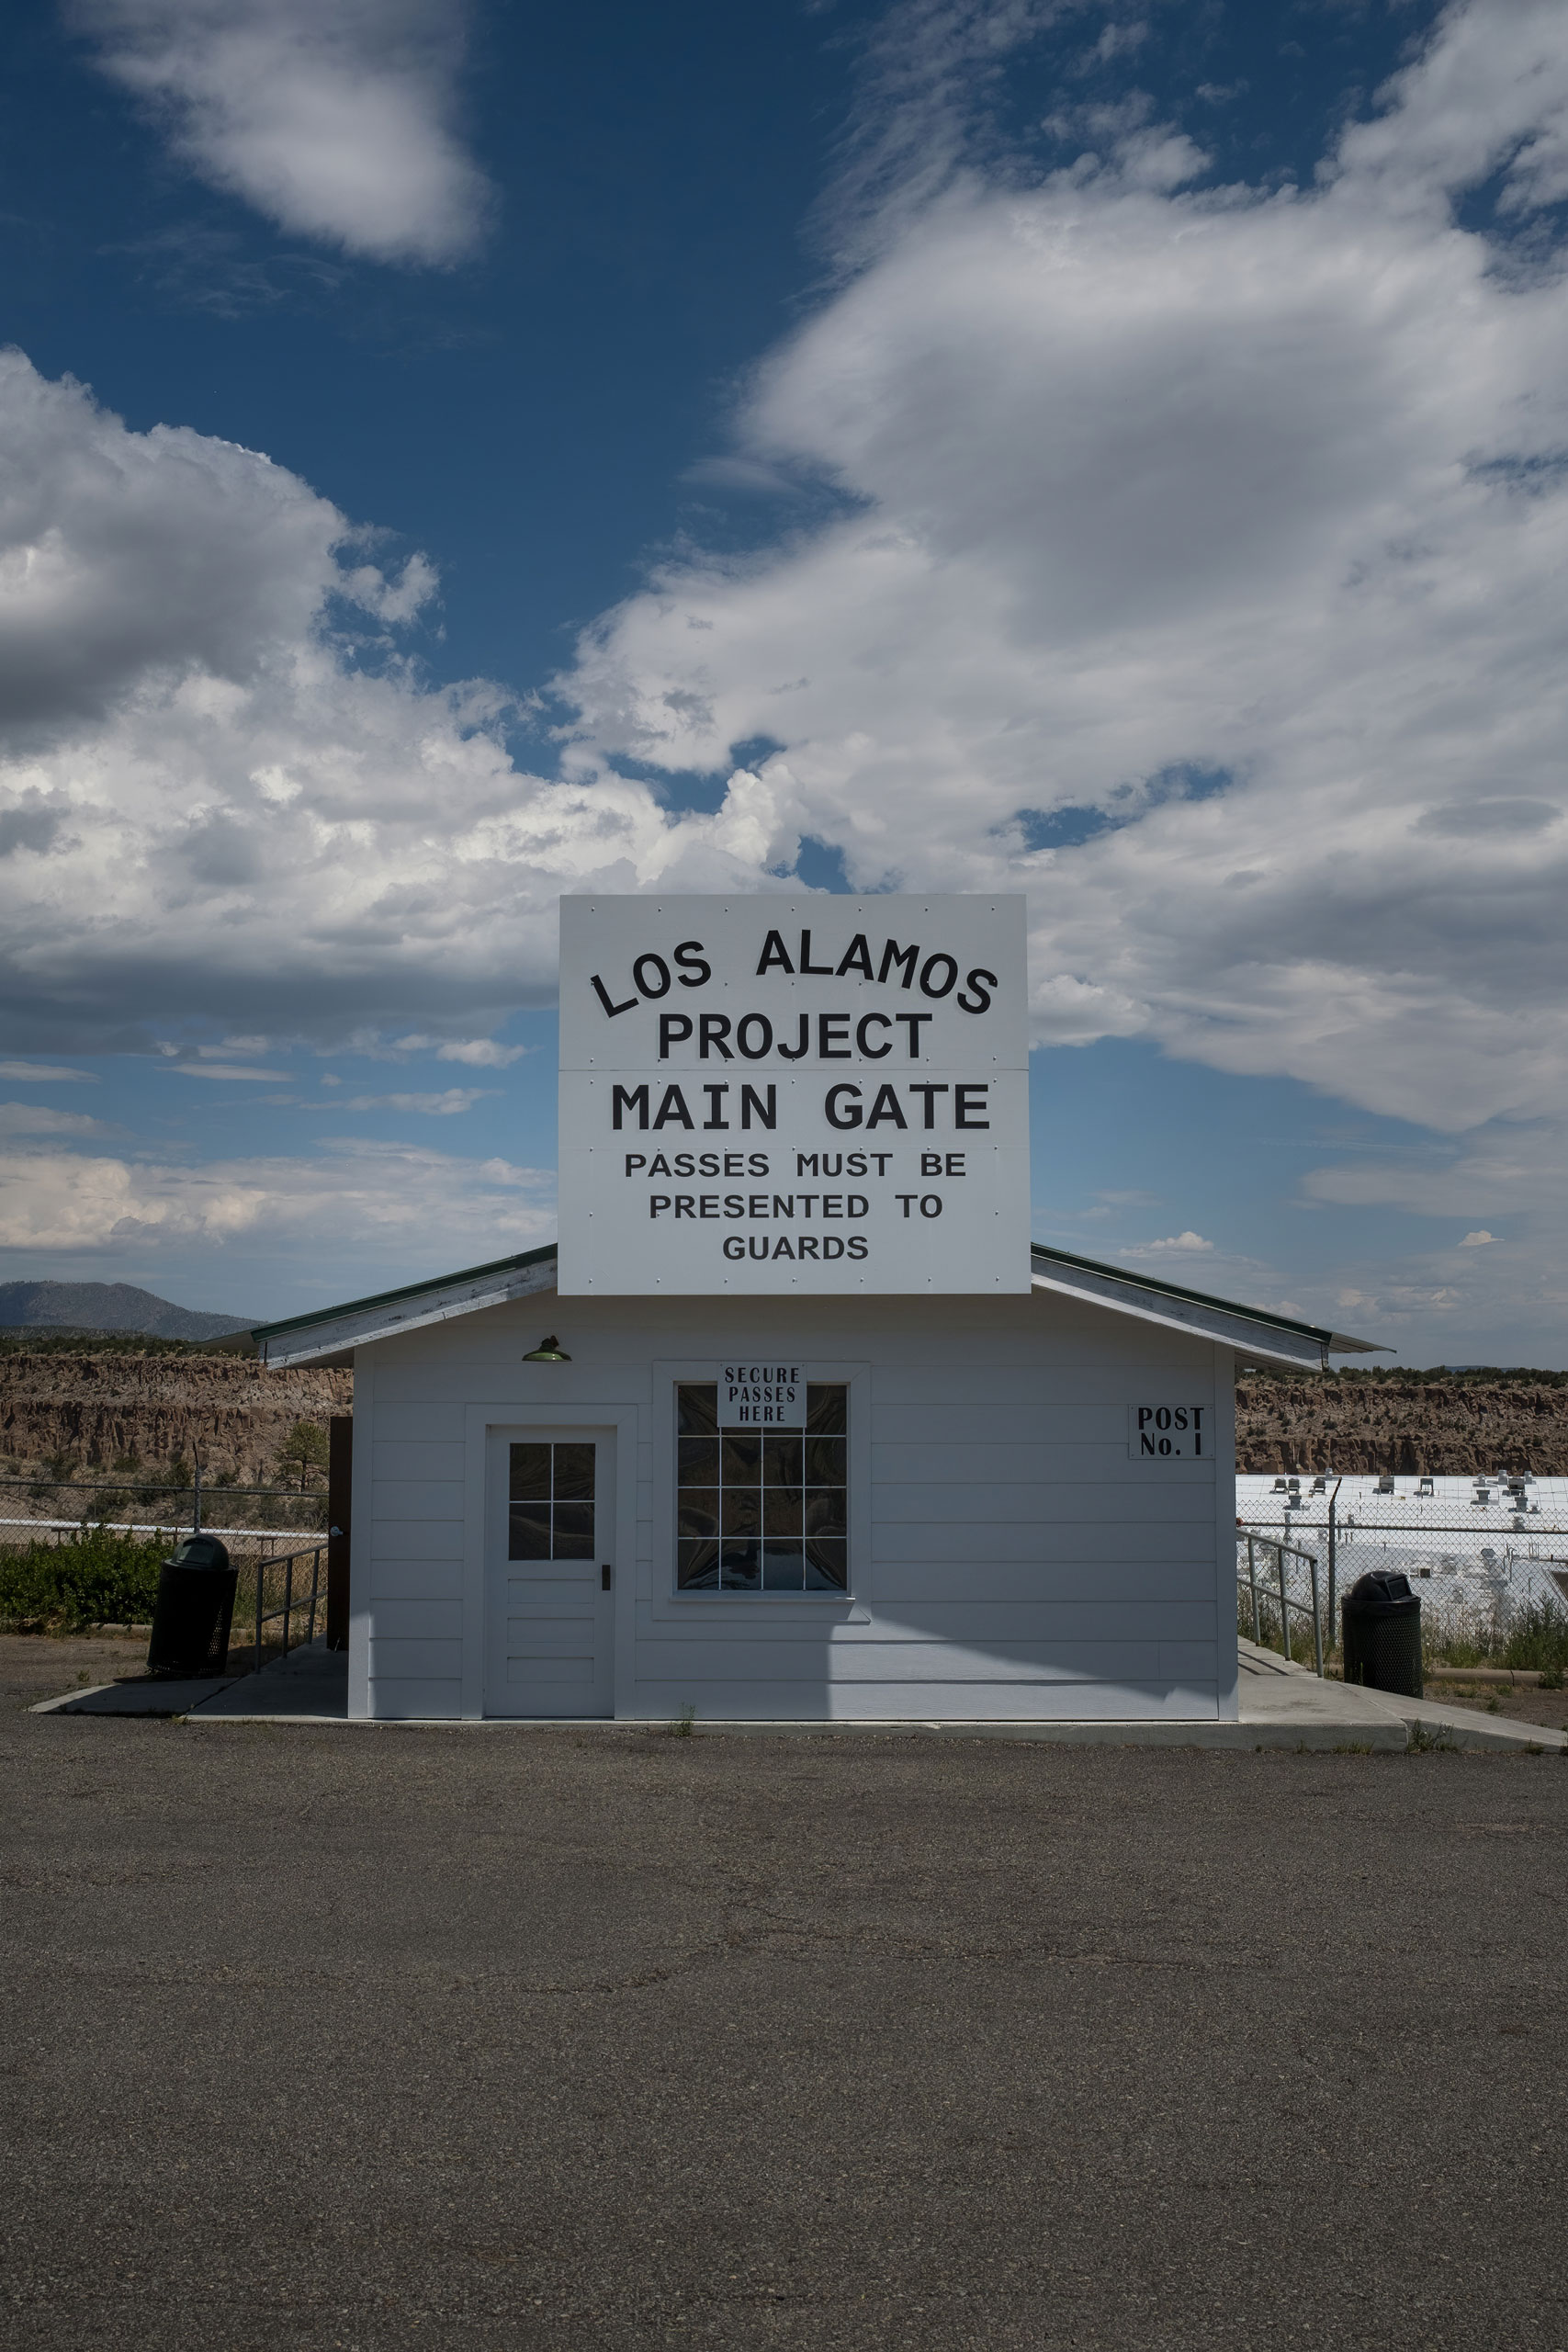 recreation of the historic security gate reading “Los Alamos Project Main Gate”